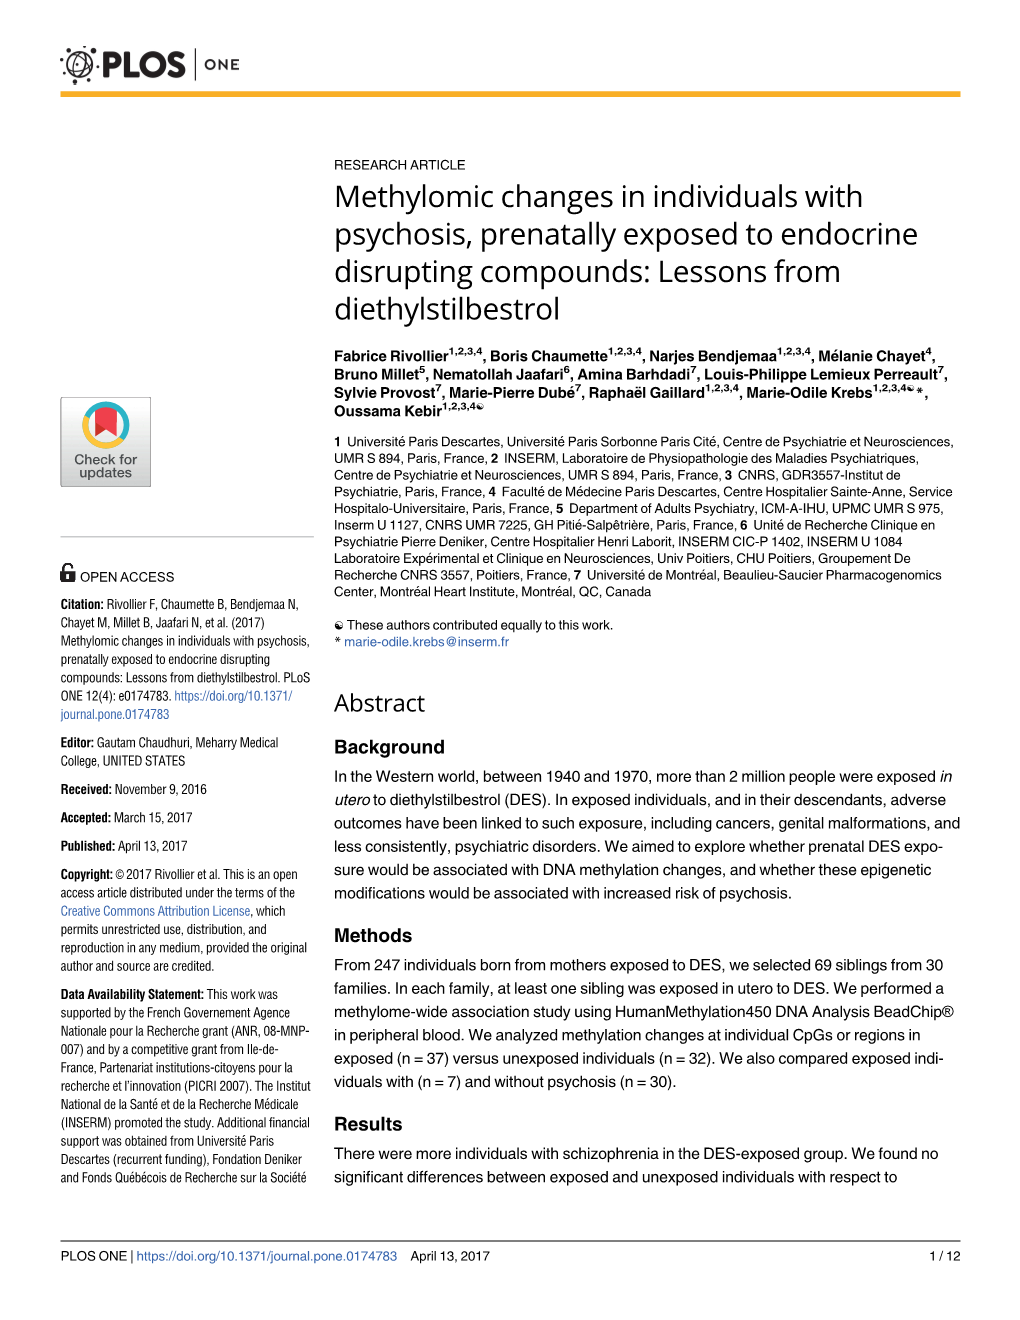 Methylomic Changes in Individuals with Psychosis, Prenatally Exposed to Endocrine Disrupting Compounds: Lessons from Diethylstilbestrol